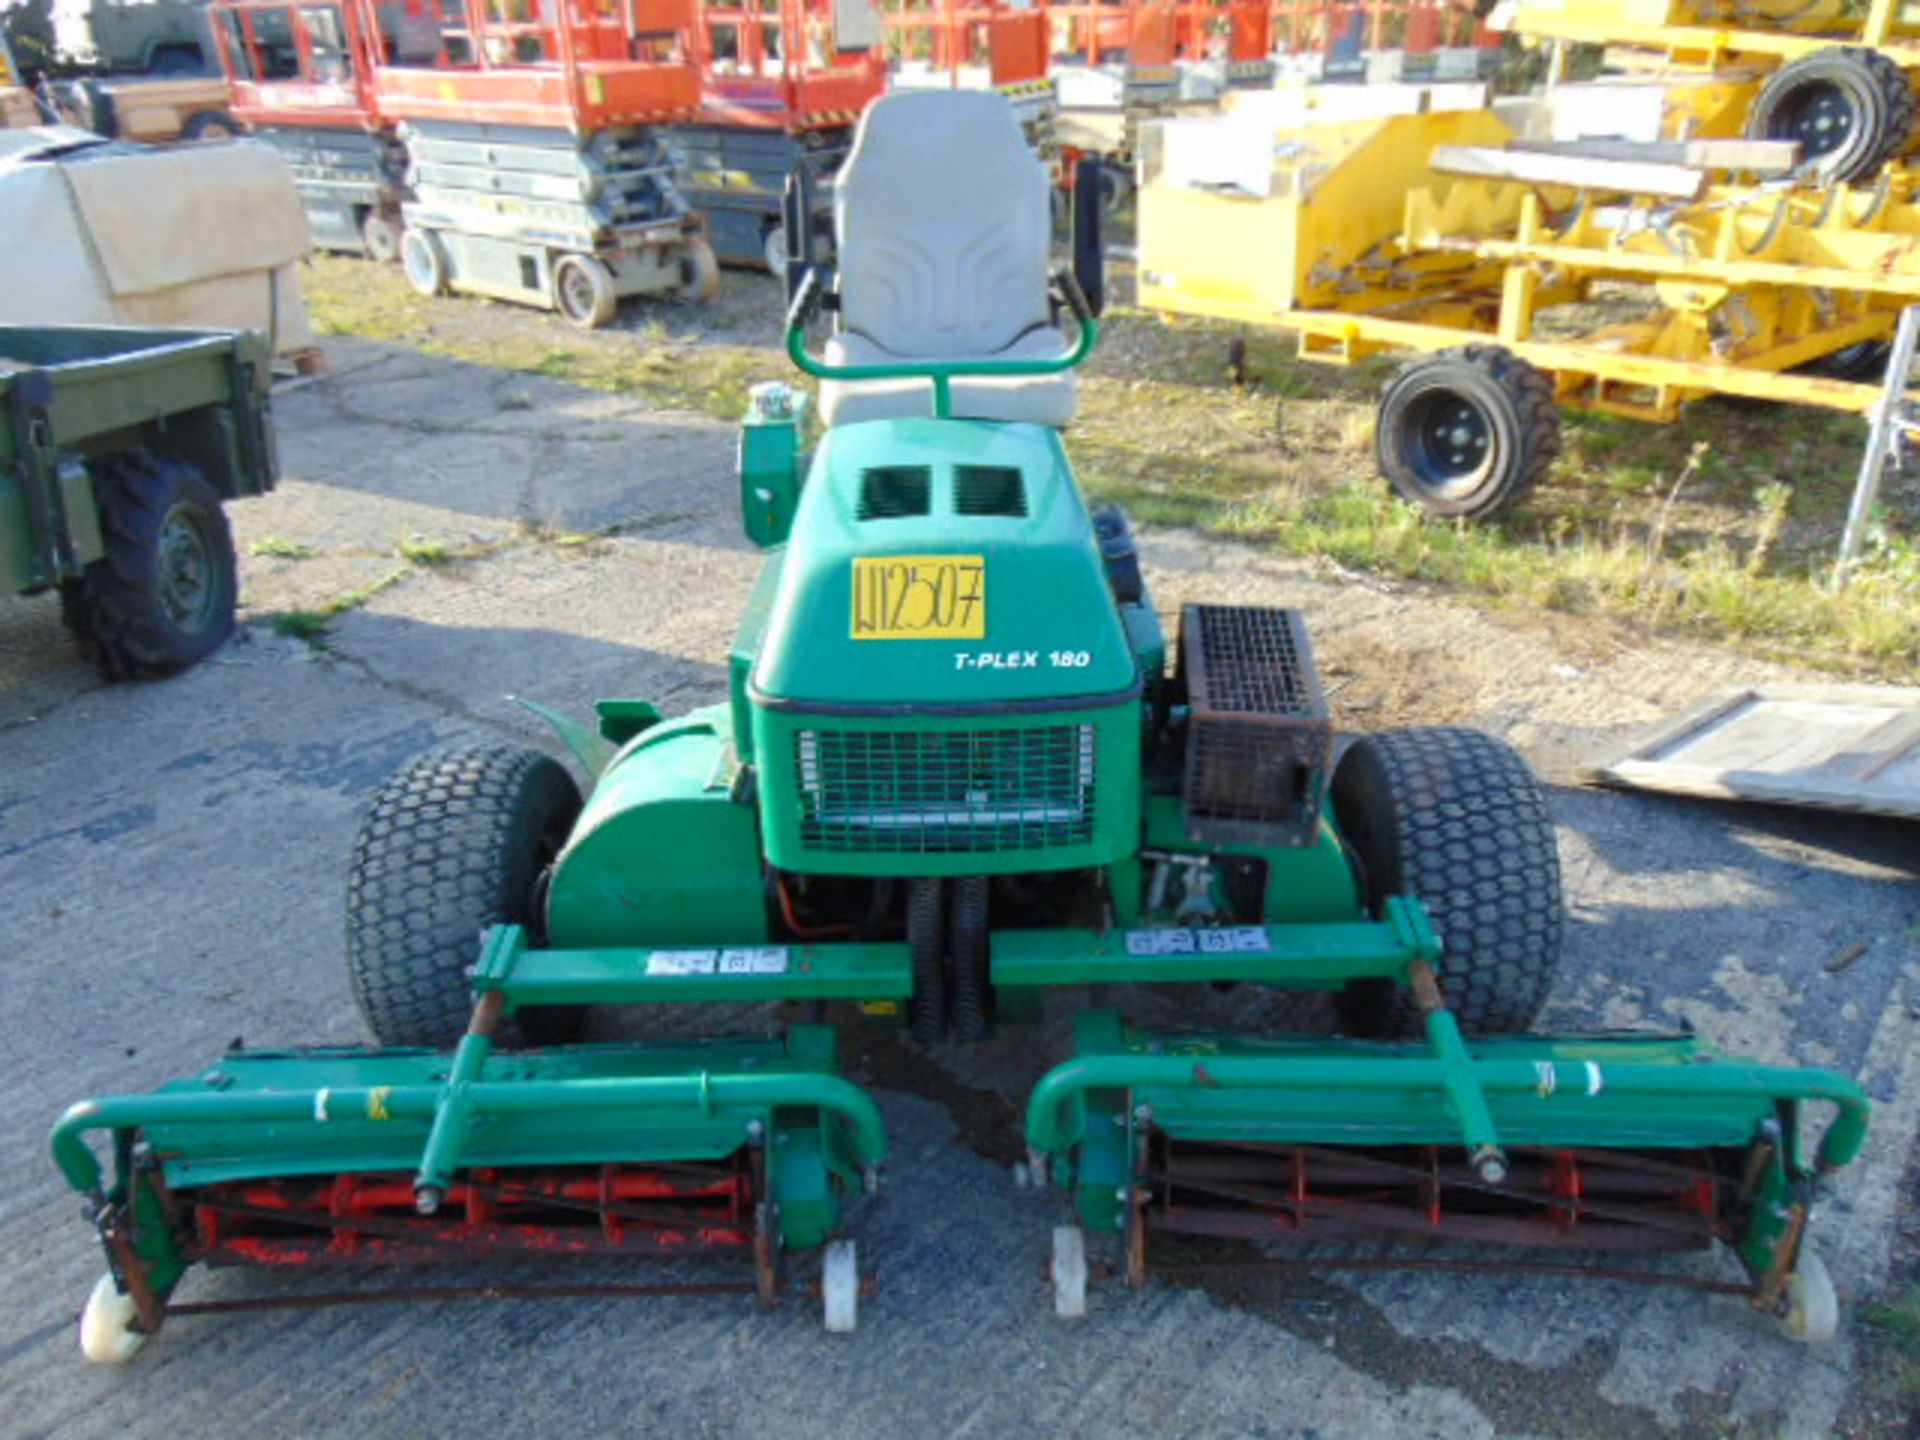 Ransomes T-Plex 180 Triple Gang Ride On Mower ONLY 709 HOURS! - Image 2 of 17